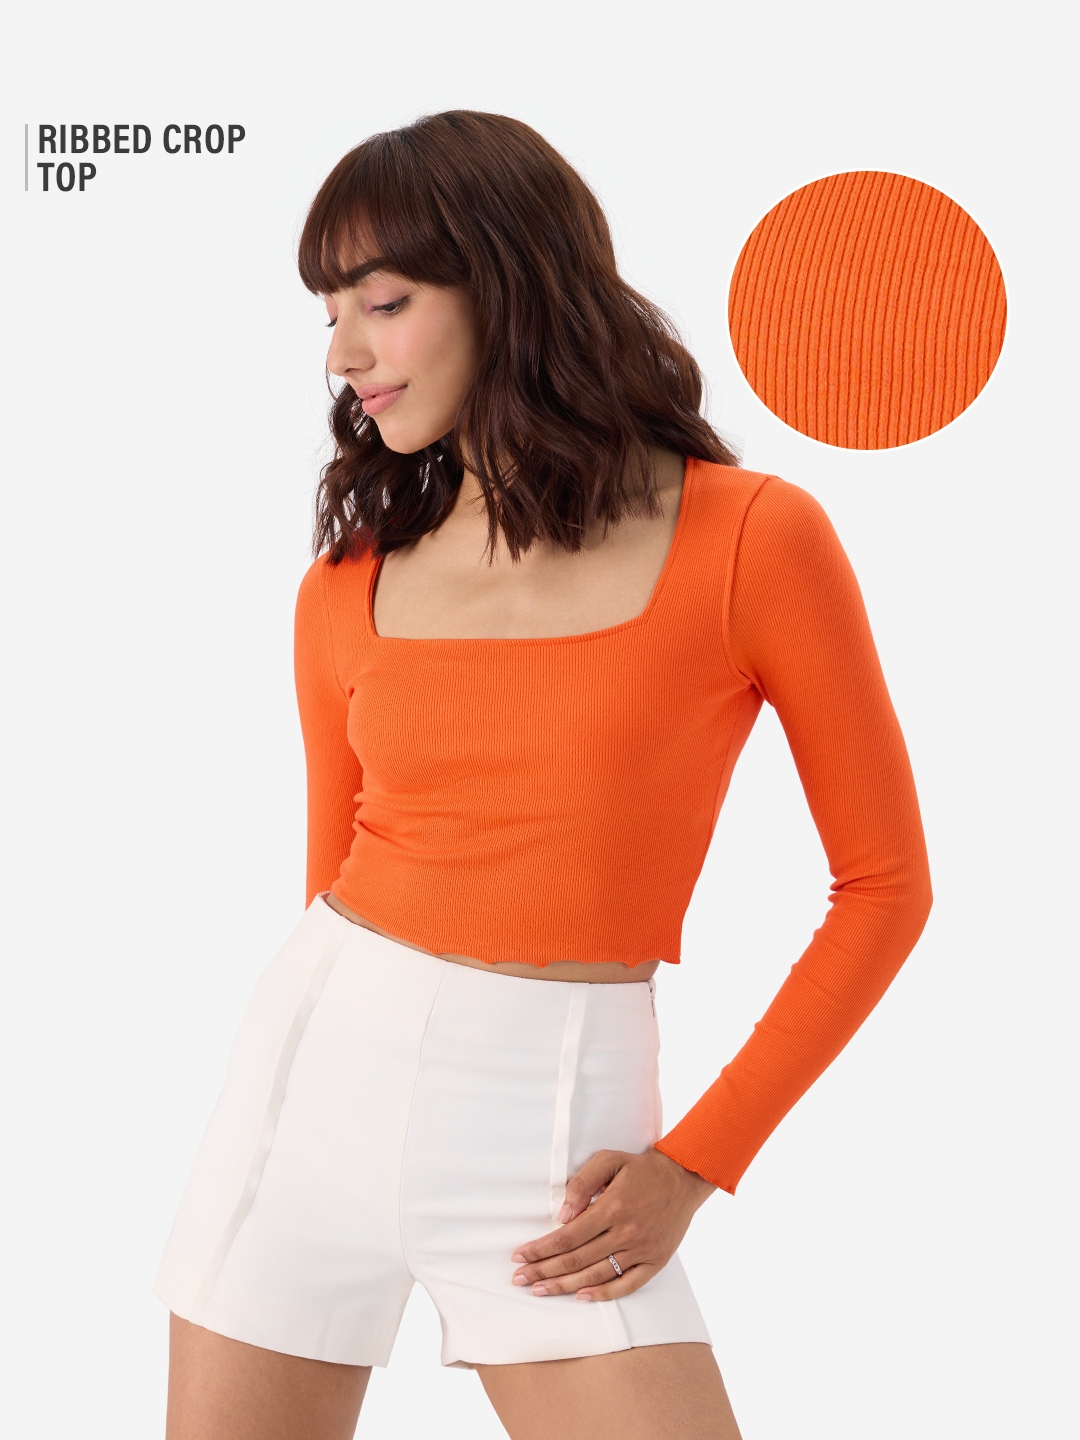 The Souled Store | Women's Flame Orange Ribbed Top Women's Full Sleeves Tops